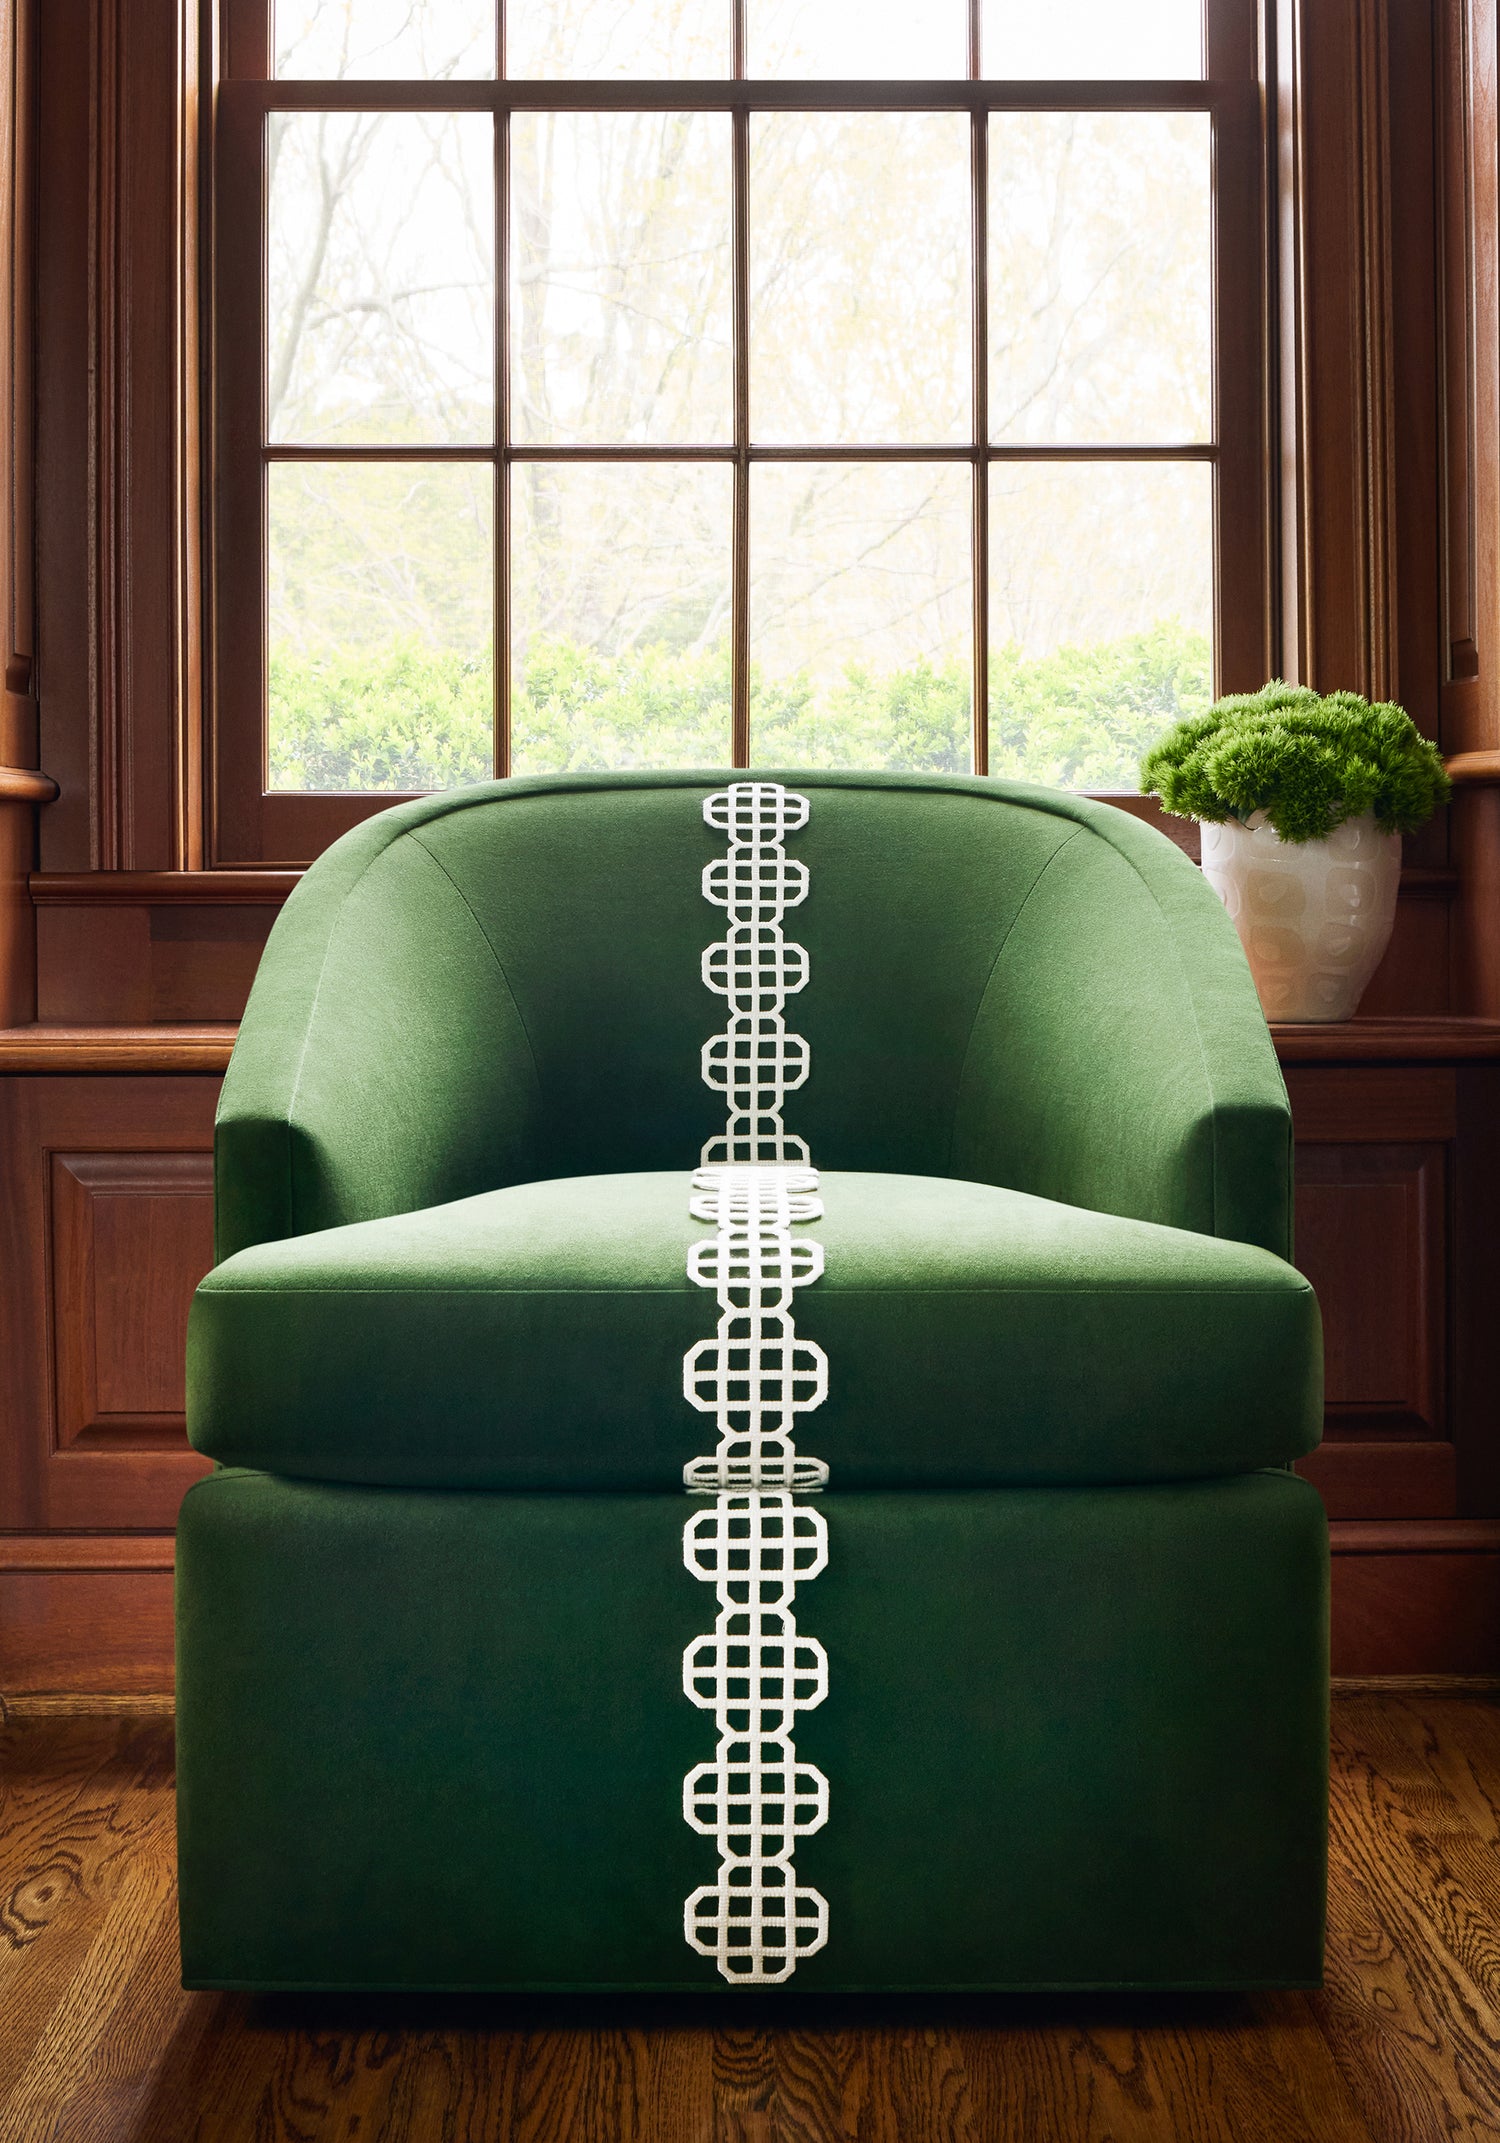 Dexter Chair in Club Velvet woven fabric in emerald color - pattern number W7251 by Thibaut in the Club Velvet collection